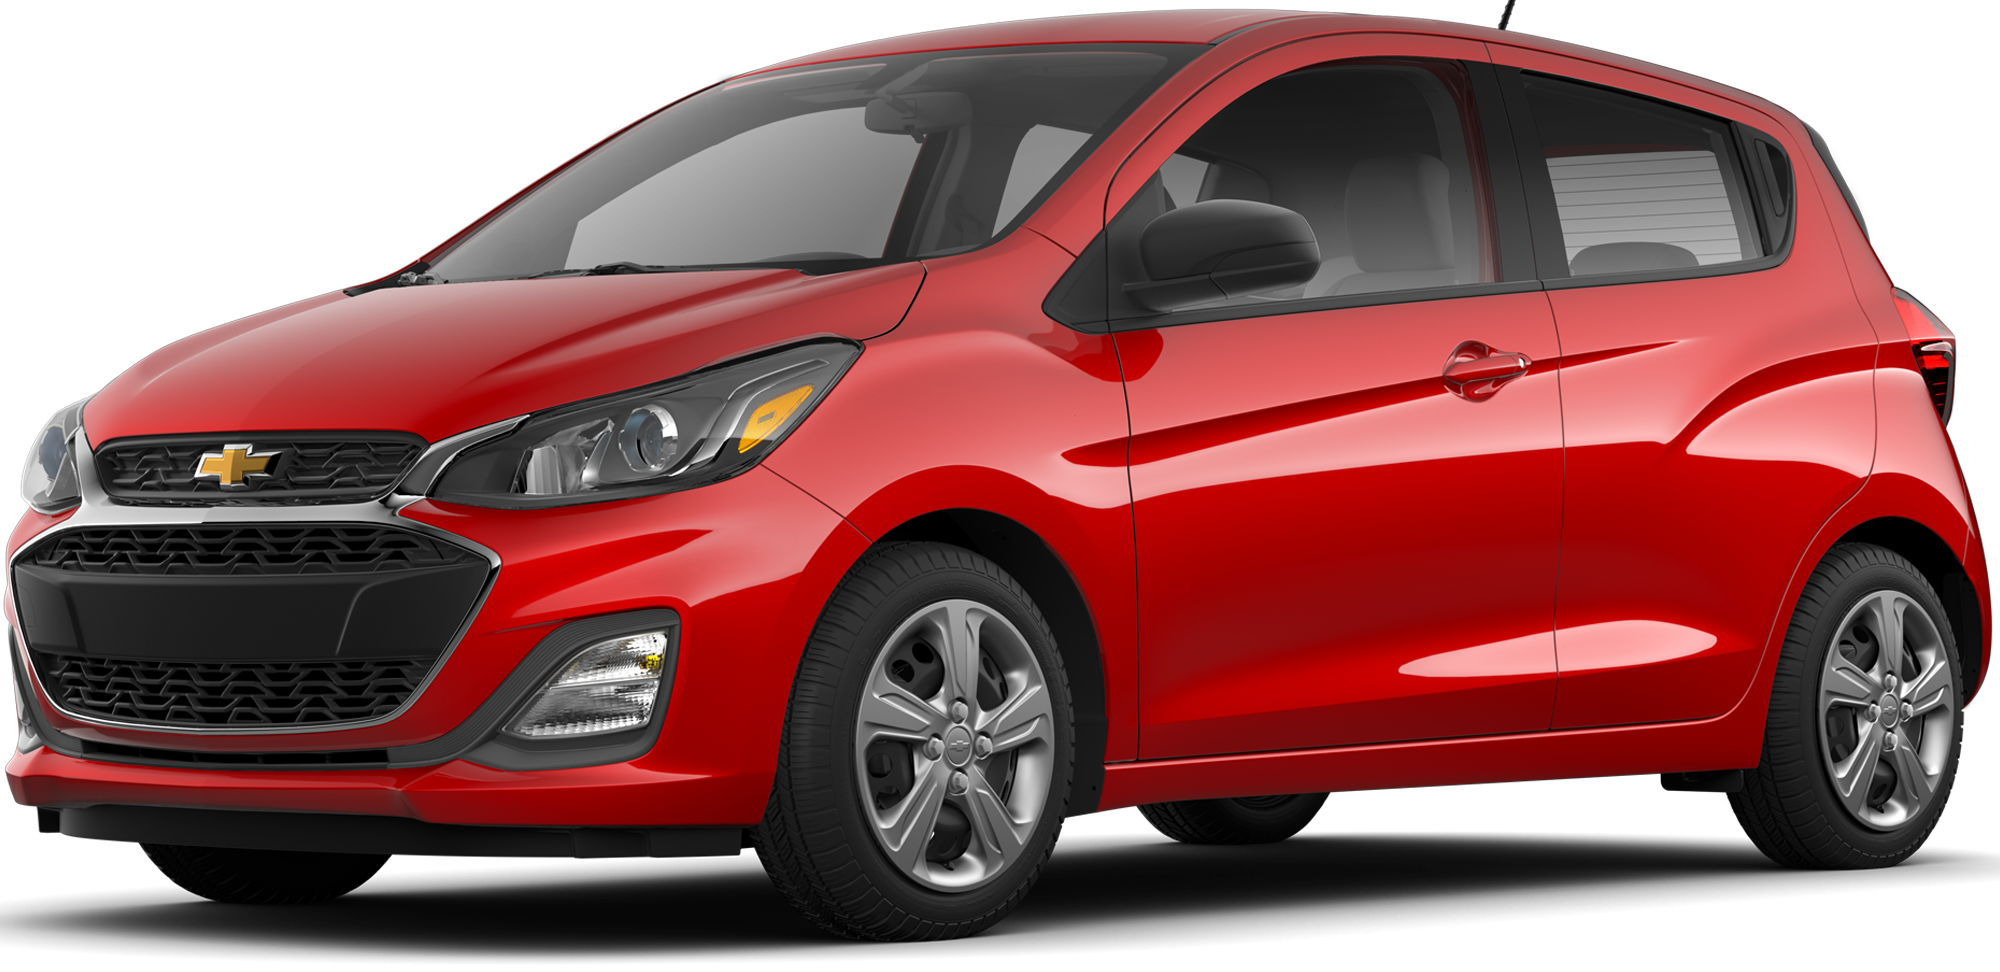 2020 Chevrolet Spark Incentives Specials Offers In SCOTTSDALE AZ